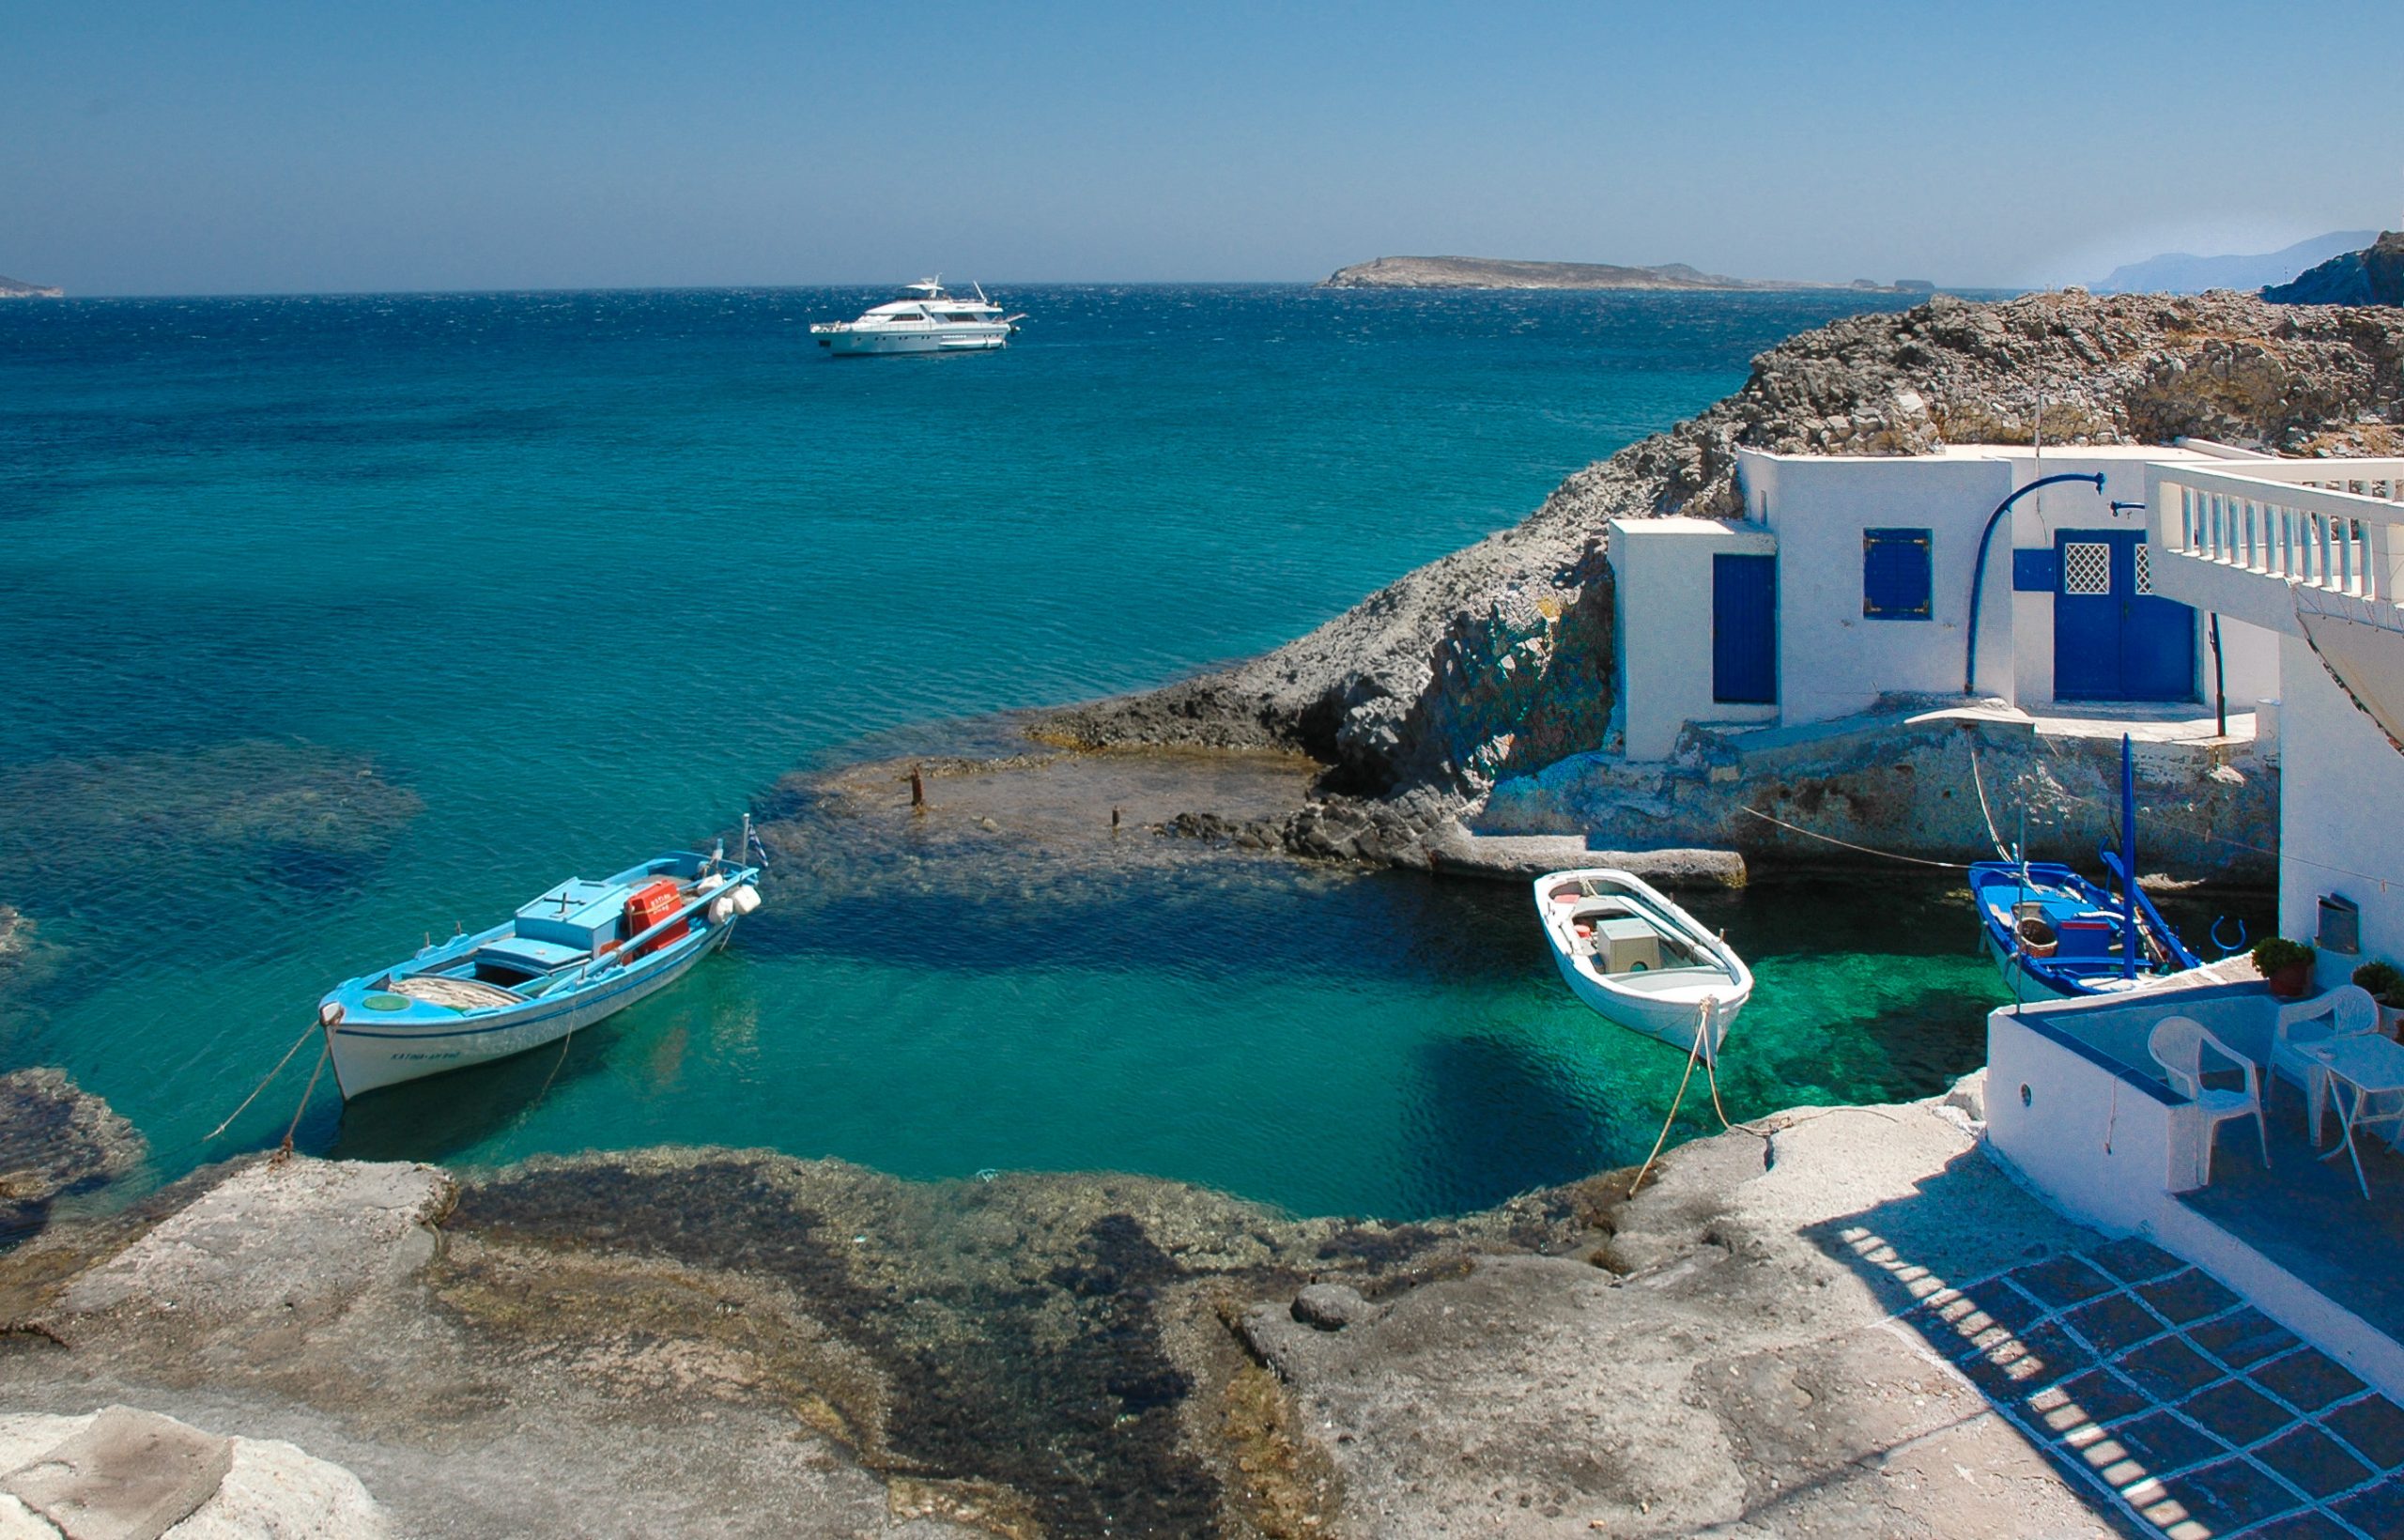 Daily Telegraph – The 10 “paradises” that Greeks want to keep… for themselves